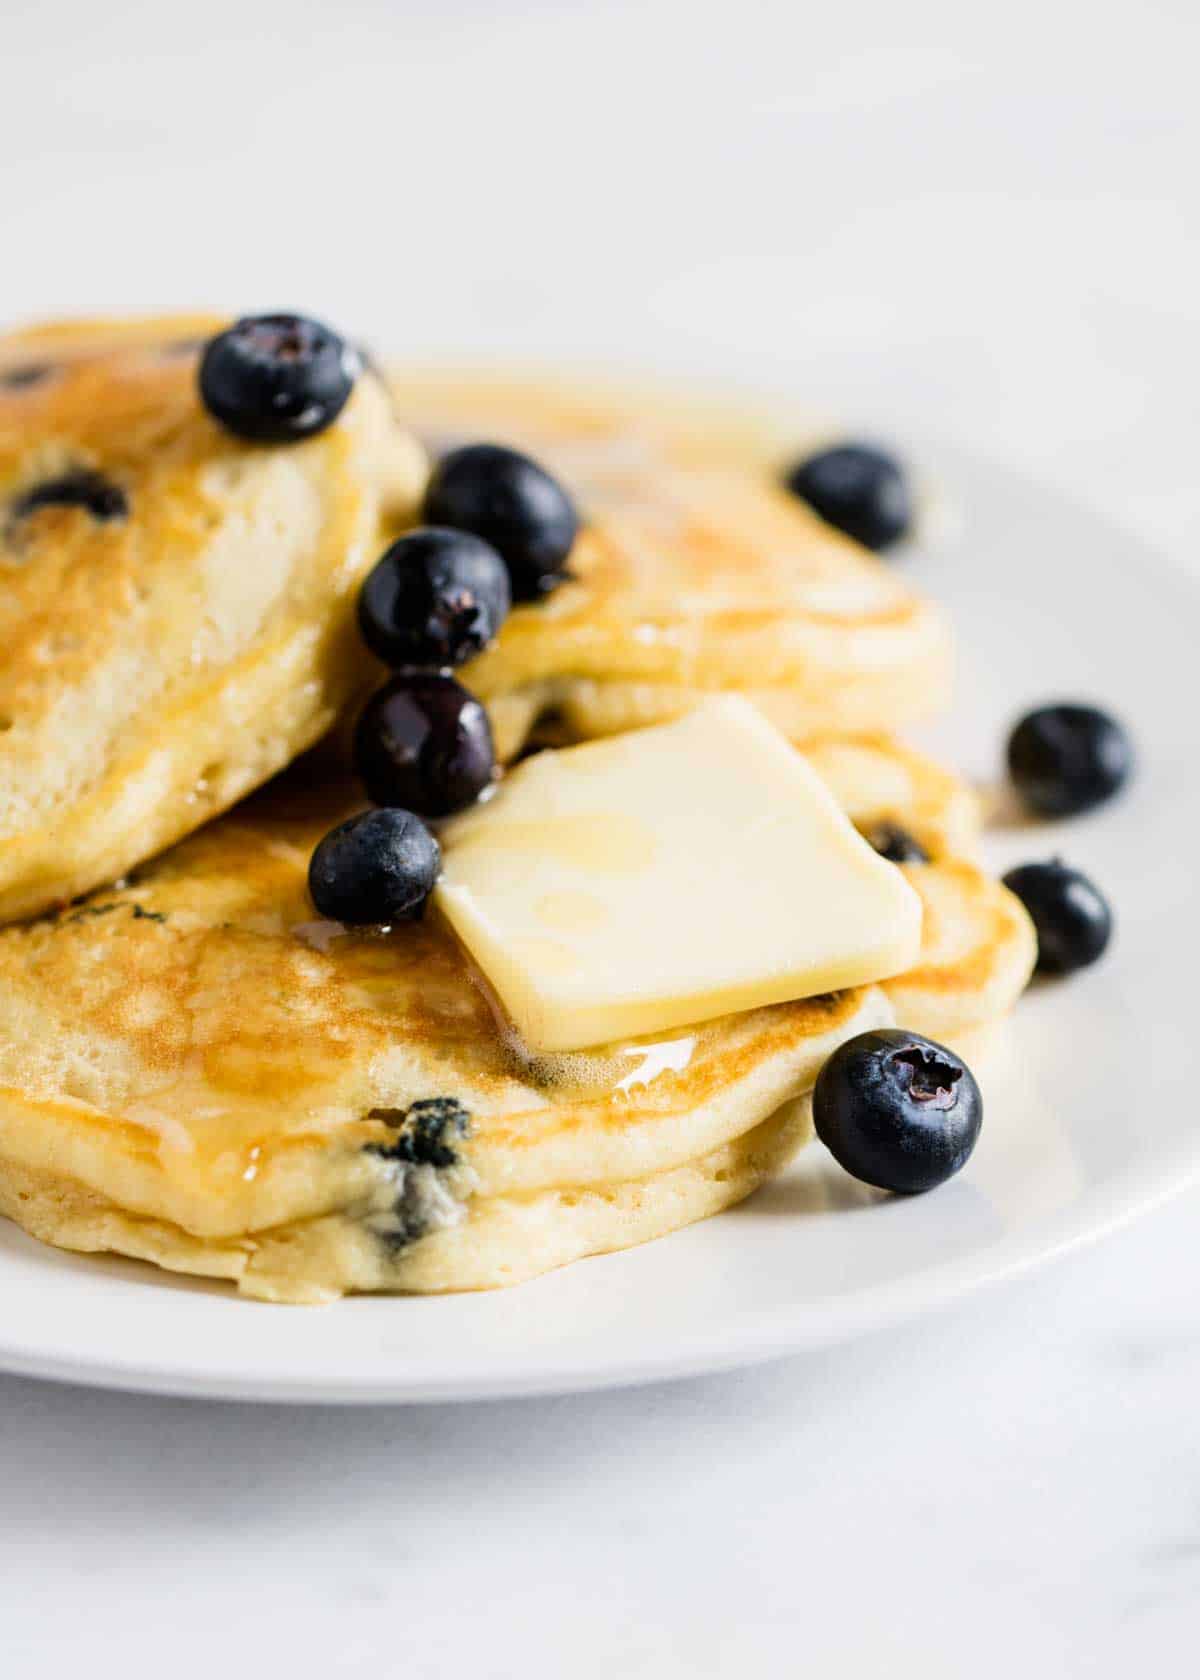 Blueberry pancakes on a white plate.